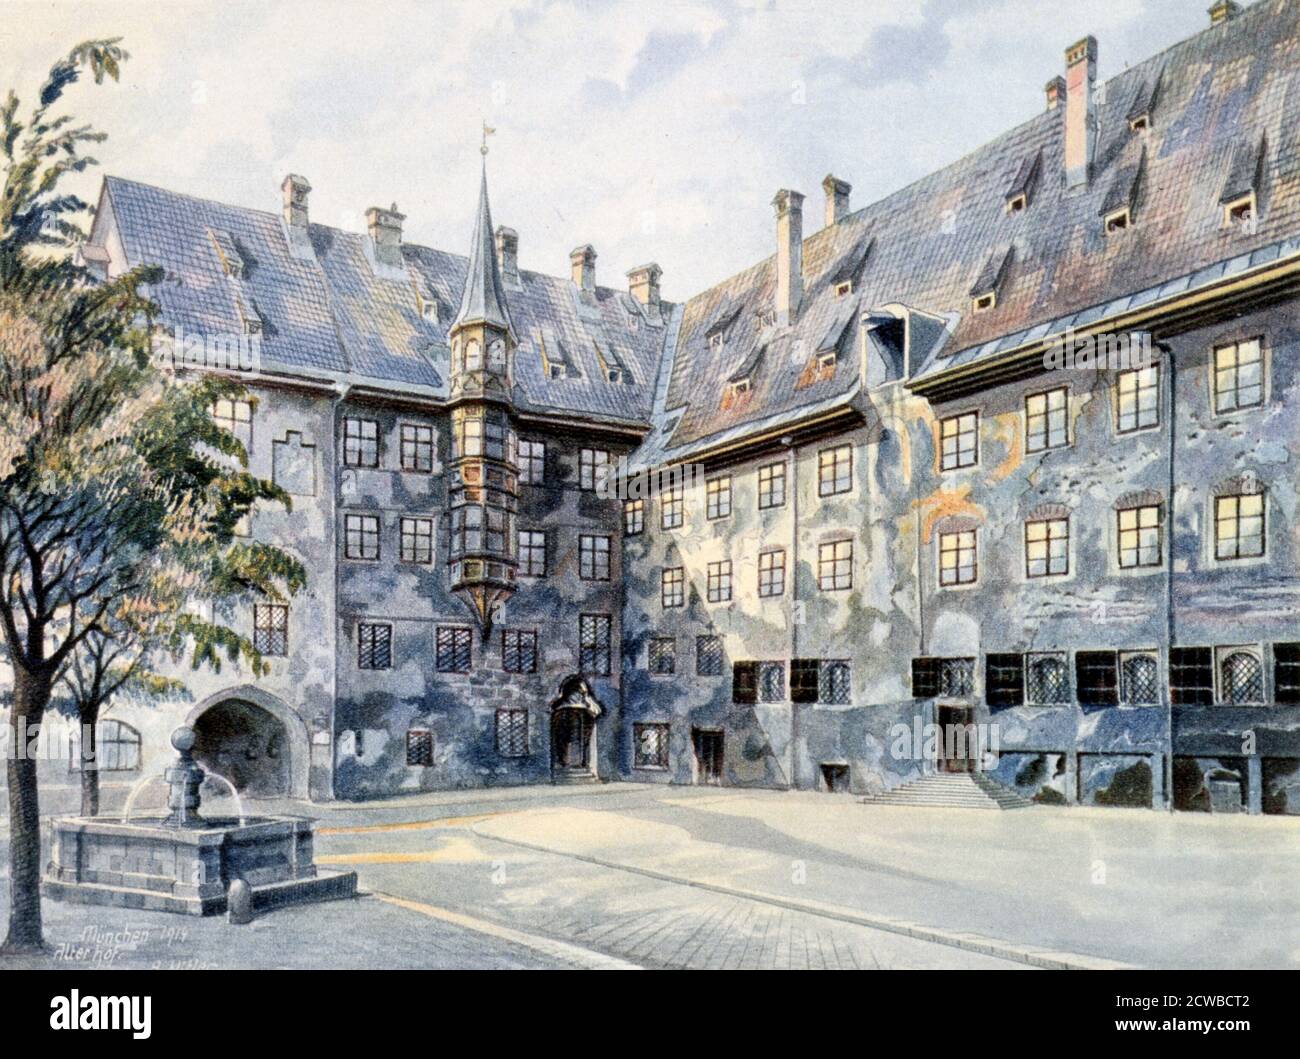 Adlof Hitler's painting titled 'The Courtyard of the Old Residenz in Munich', 1914. Hitler often claimed to be a frustrated artist. He produced many paintings, predominantly landscapes, postcard scenes and urban views, and there was a considerable market for his work during the Third Reich. This example of his work was reproduced in a coffee table book about Hitler published during the Third Reich, millions of copies of which were printed. By 1938, Hitler had decided to prohibit reproductions of his paintings. Stock Photo